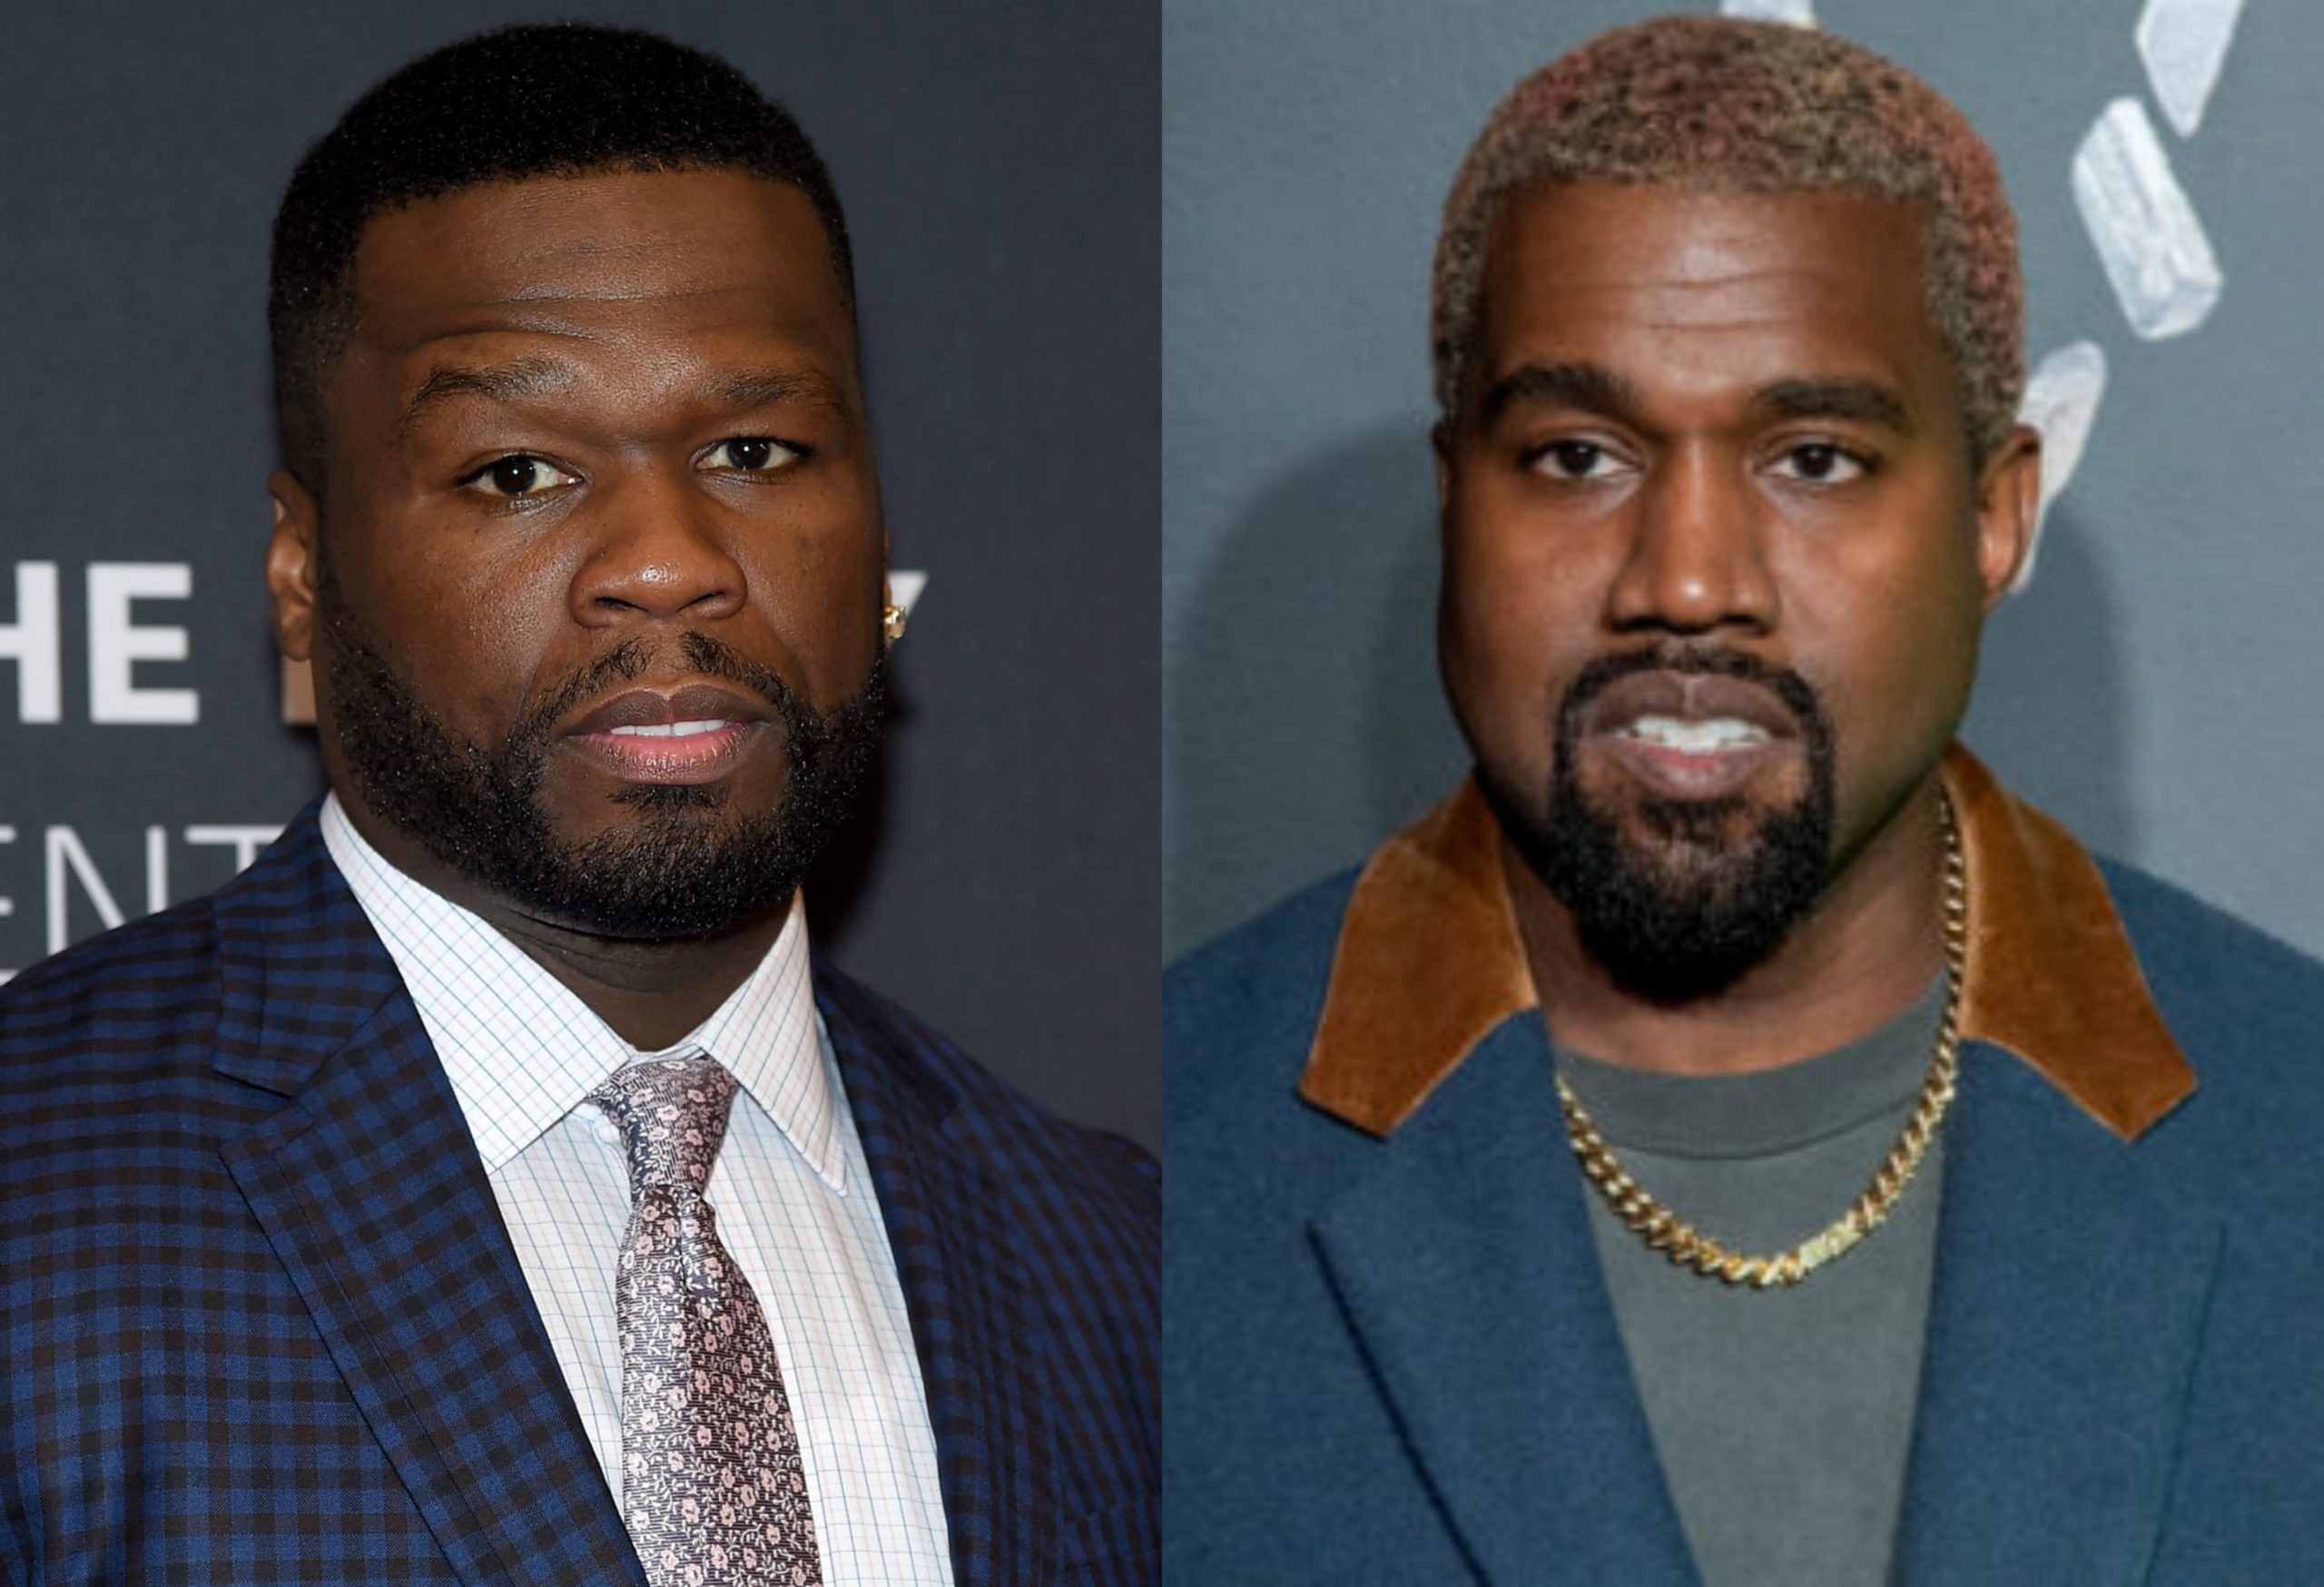 50 Cent Blasts Kanye West For Election Interference Go To Jail For Tampering